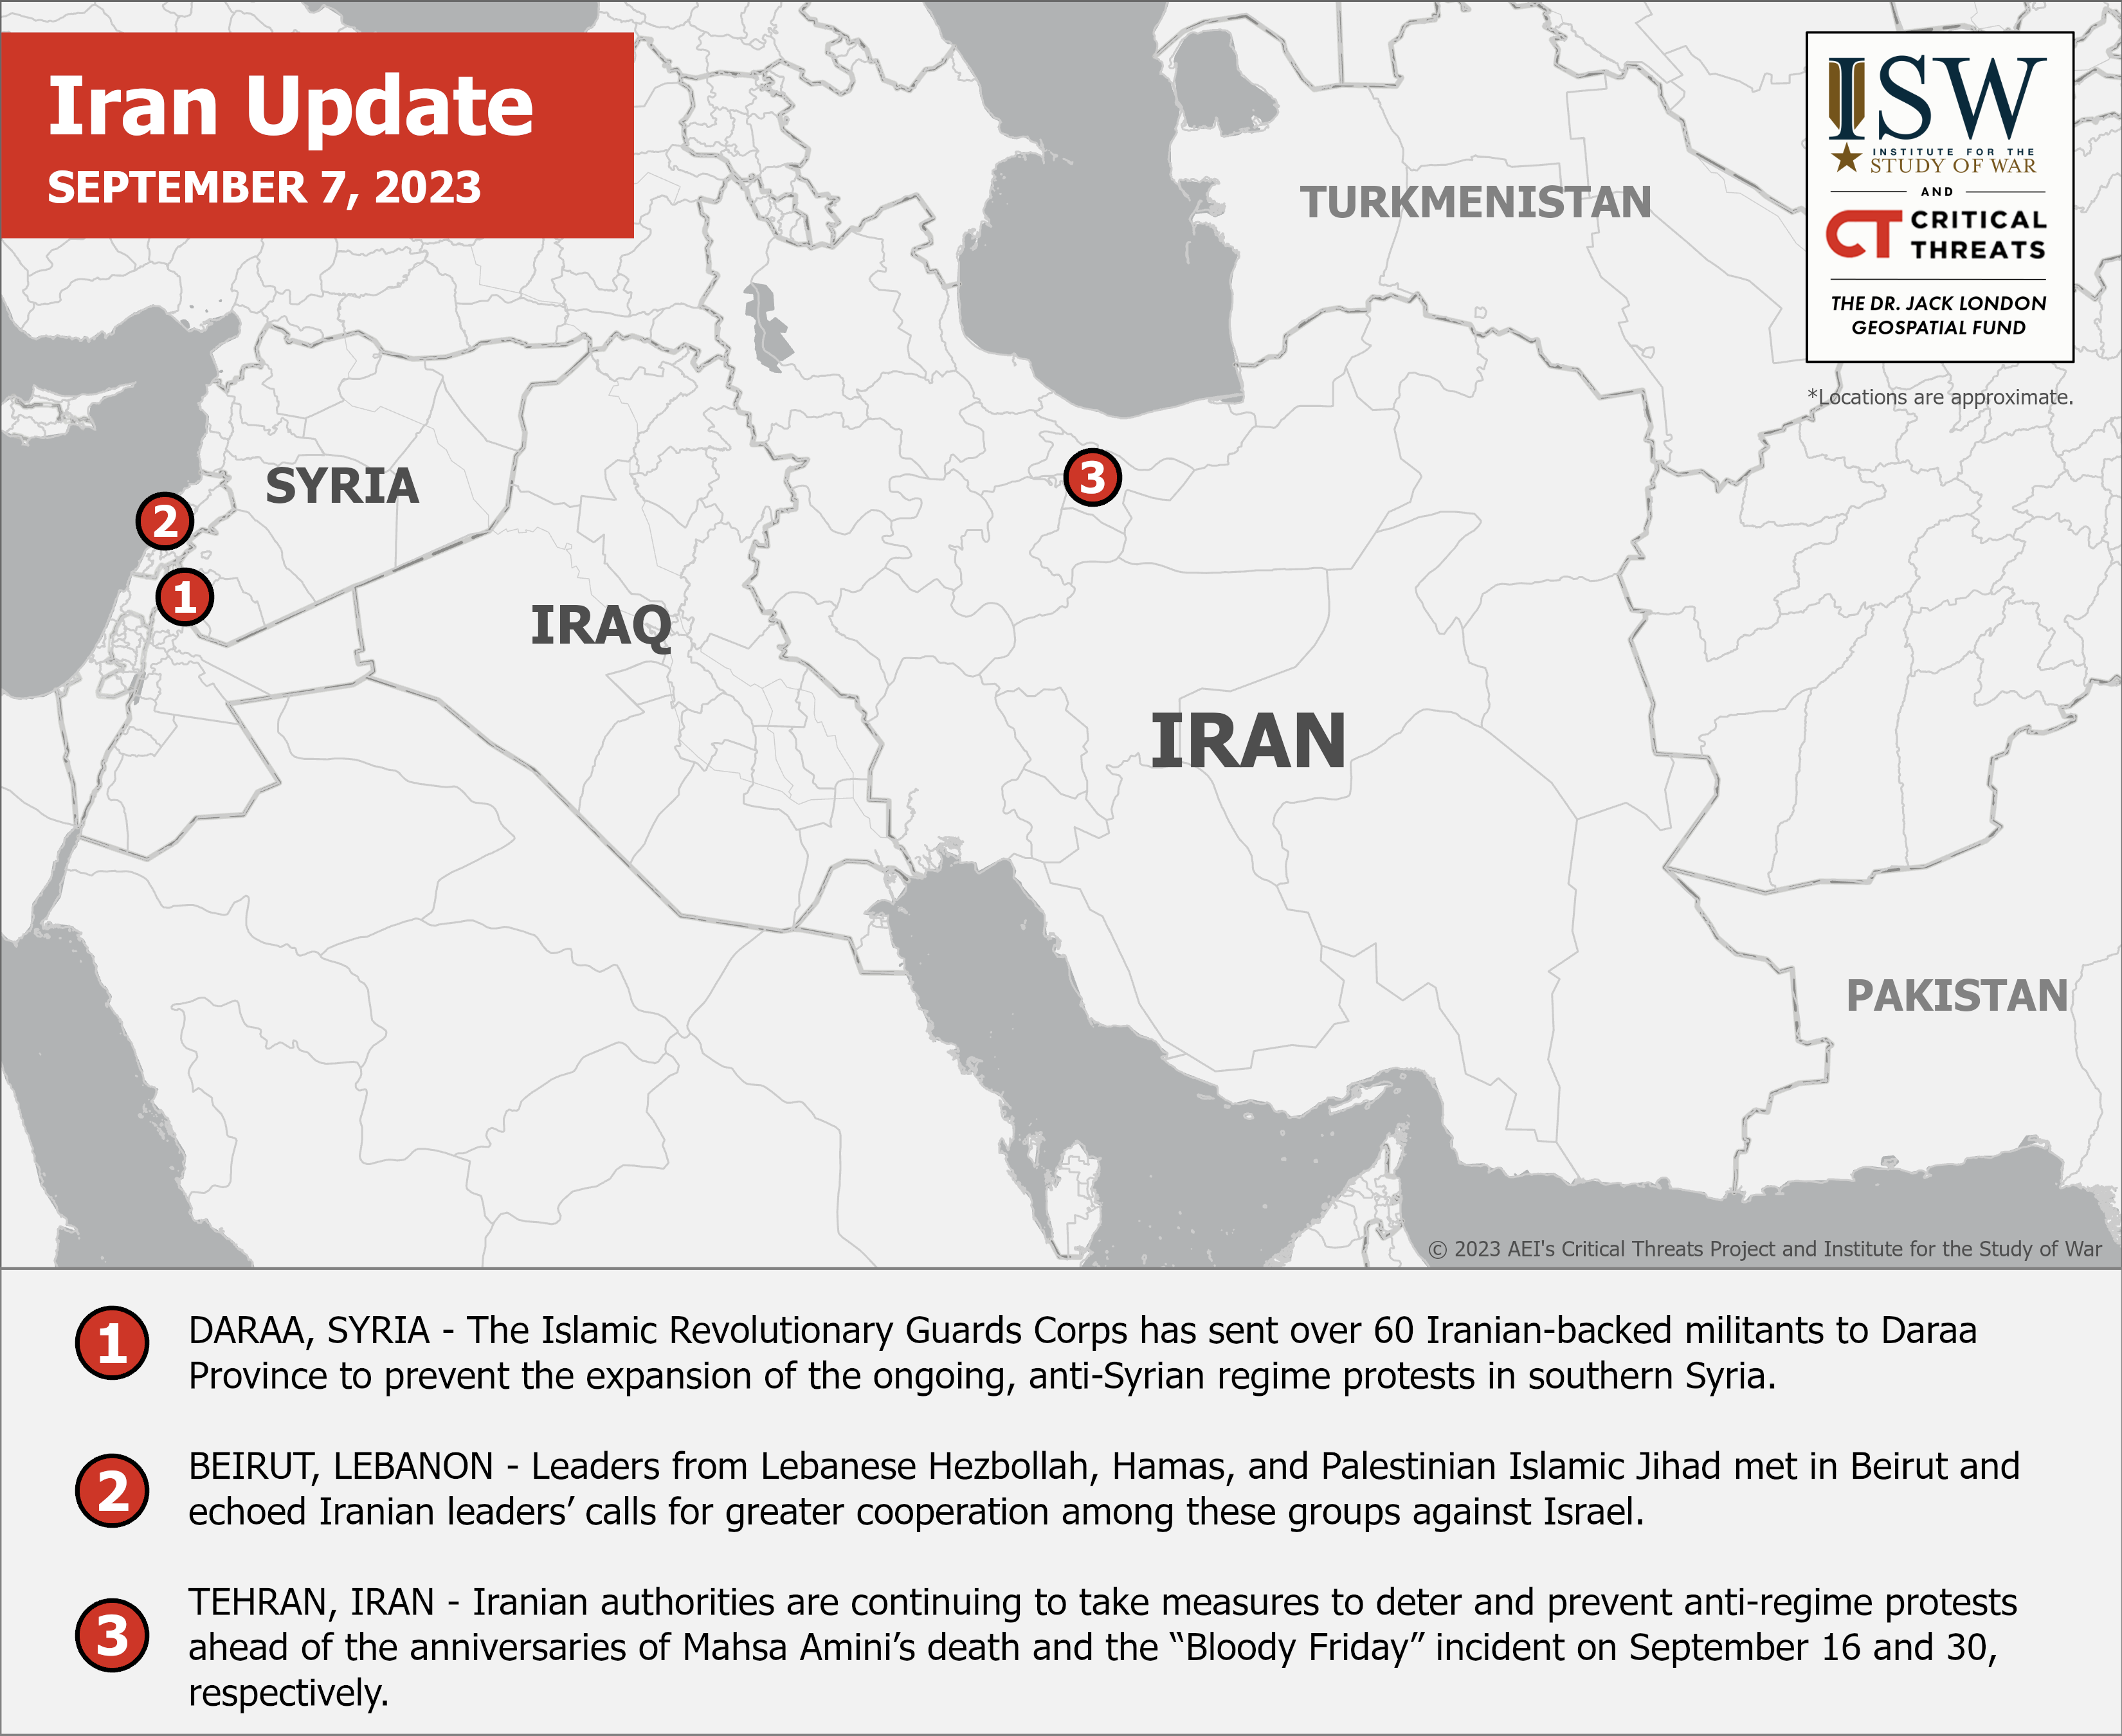 Iran Update, September 7, 2023 | Institute for the Study of War